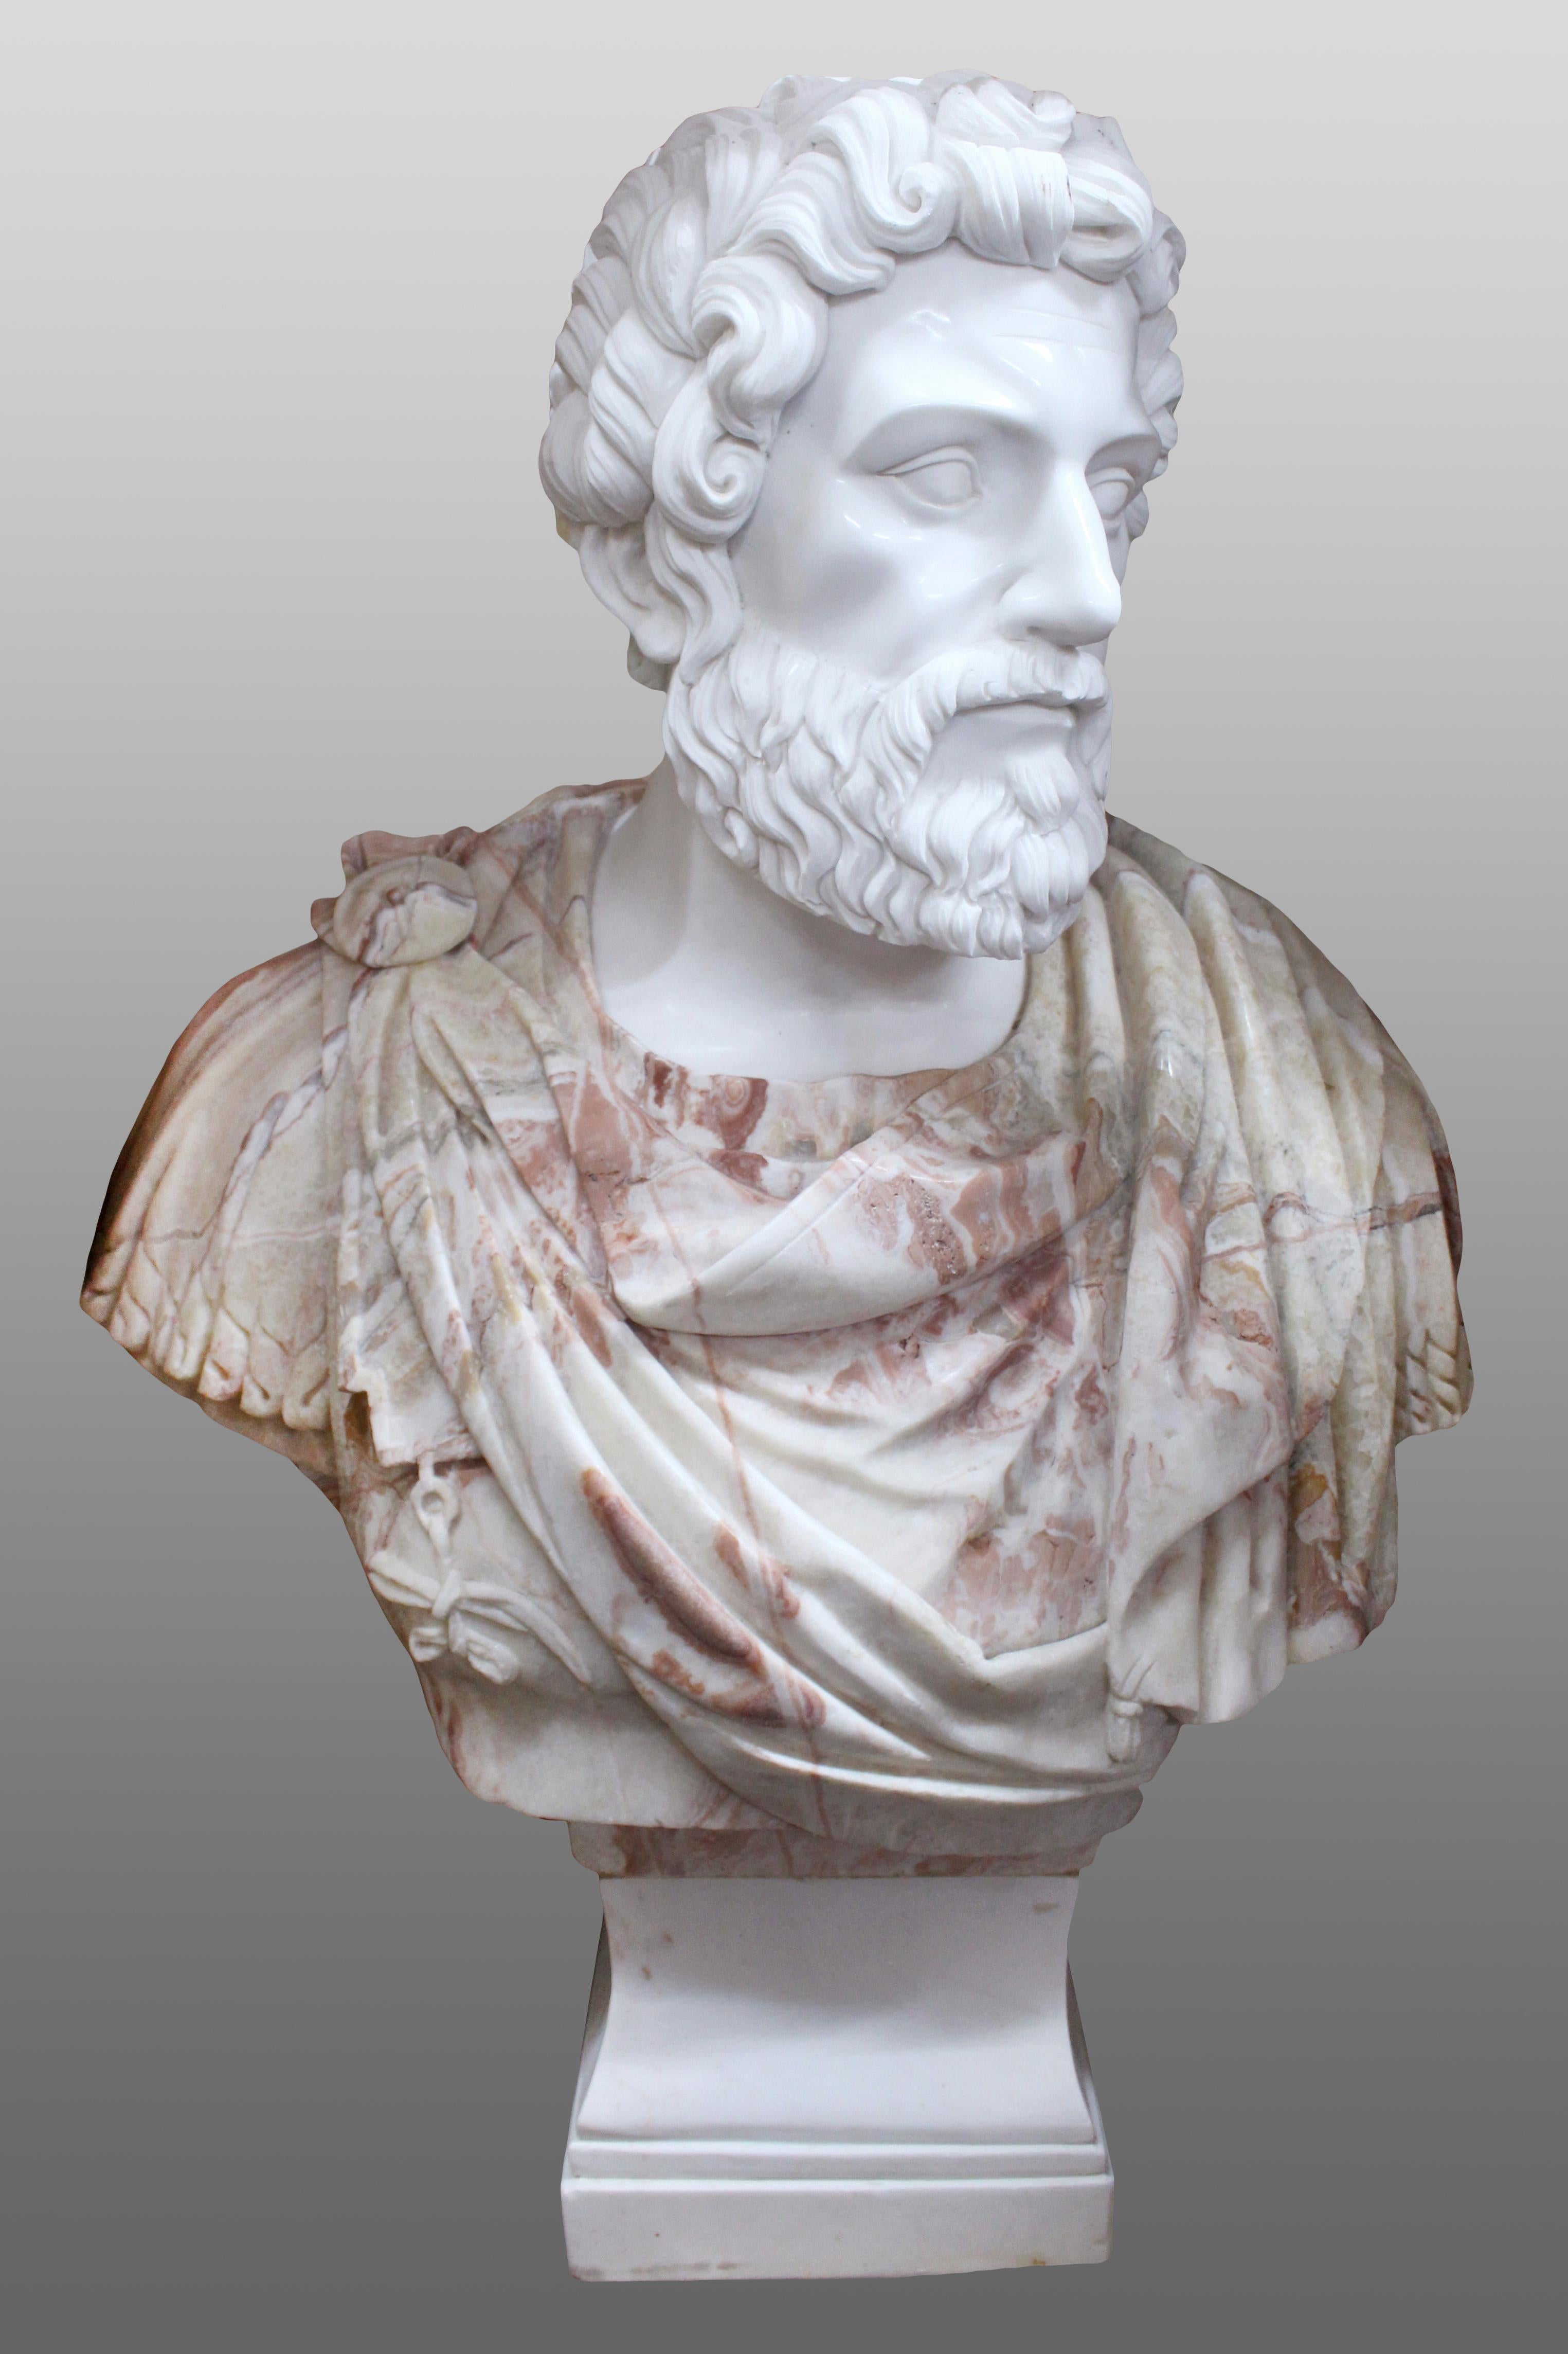 Carved white & rouge marble bust of Marcus Aurelius

Measures: Width 74 cm 29 in
Depth 32 cm 12 1/2 in
Height 95 cm 37 1/2 in
Base 25 x 25 cm 10 x 10 in.
 

Period late 20th century

Composition the whole made from carved marble in three